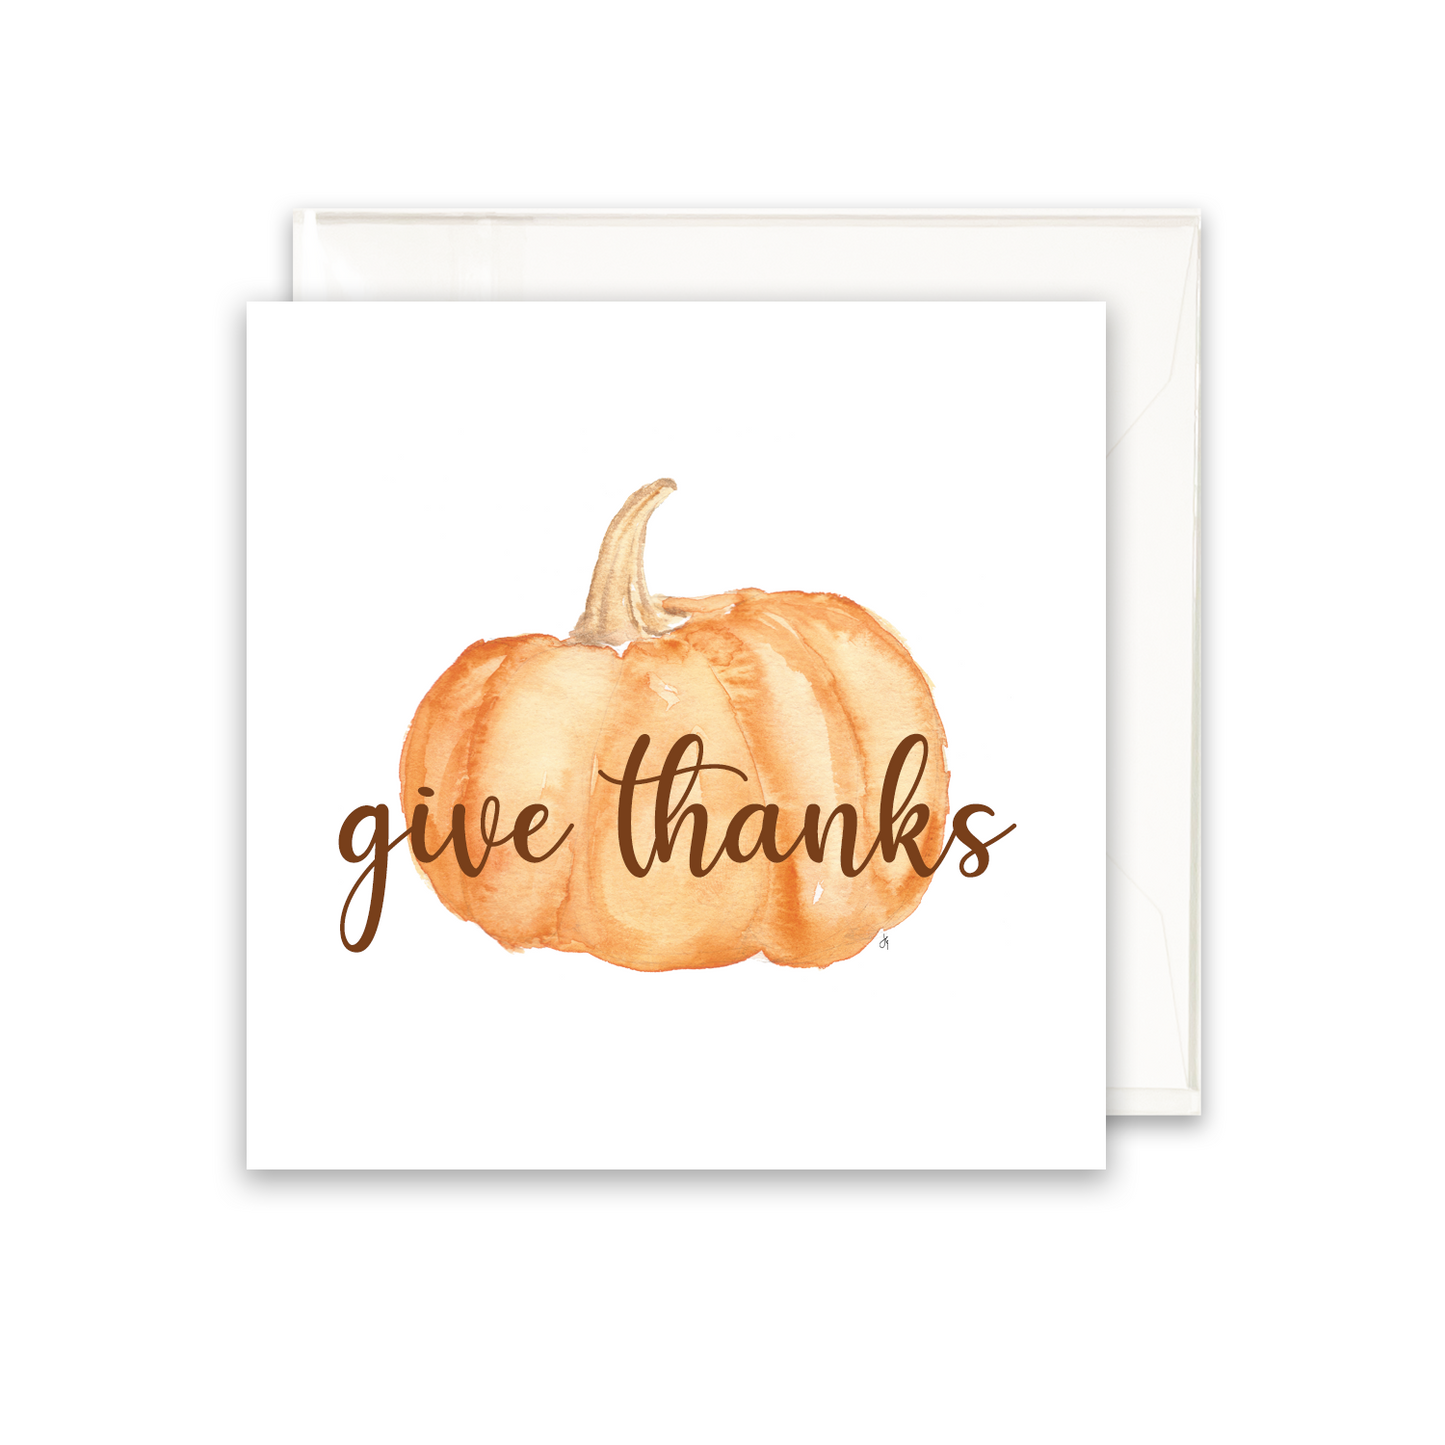 enclosure card with a watercolor pumpkin written Give thanks across the front. Blank inside